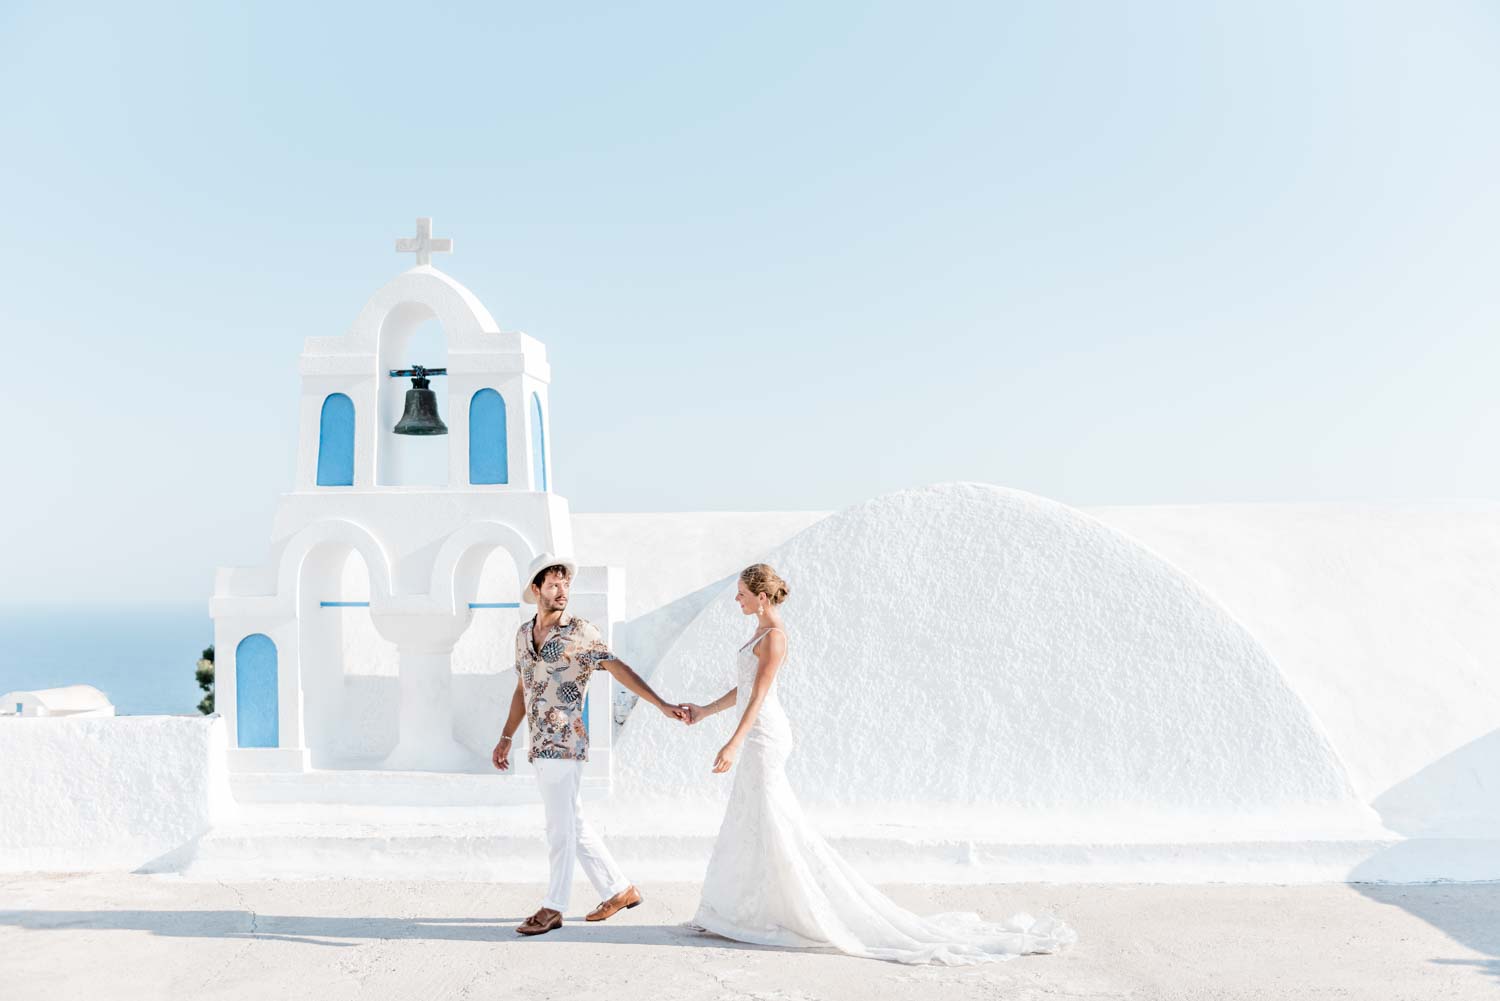 5 amazing wedding venues for an intimate wedding in Greece - Wit ...